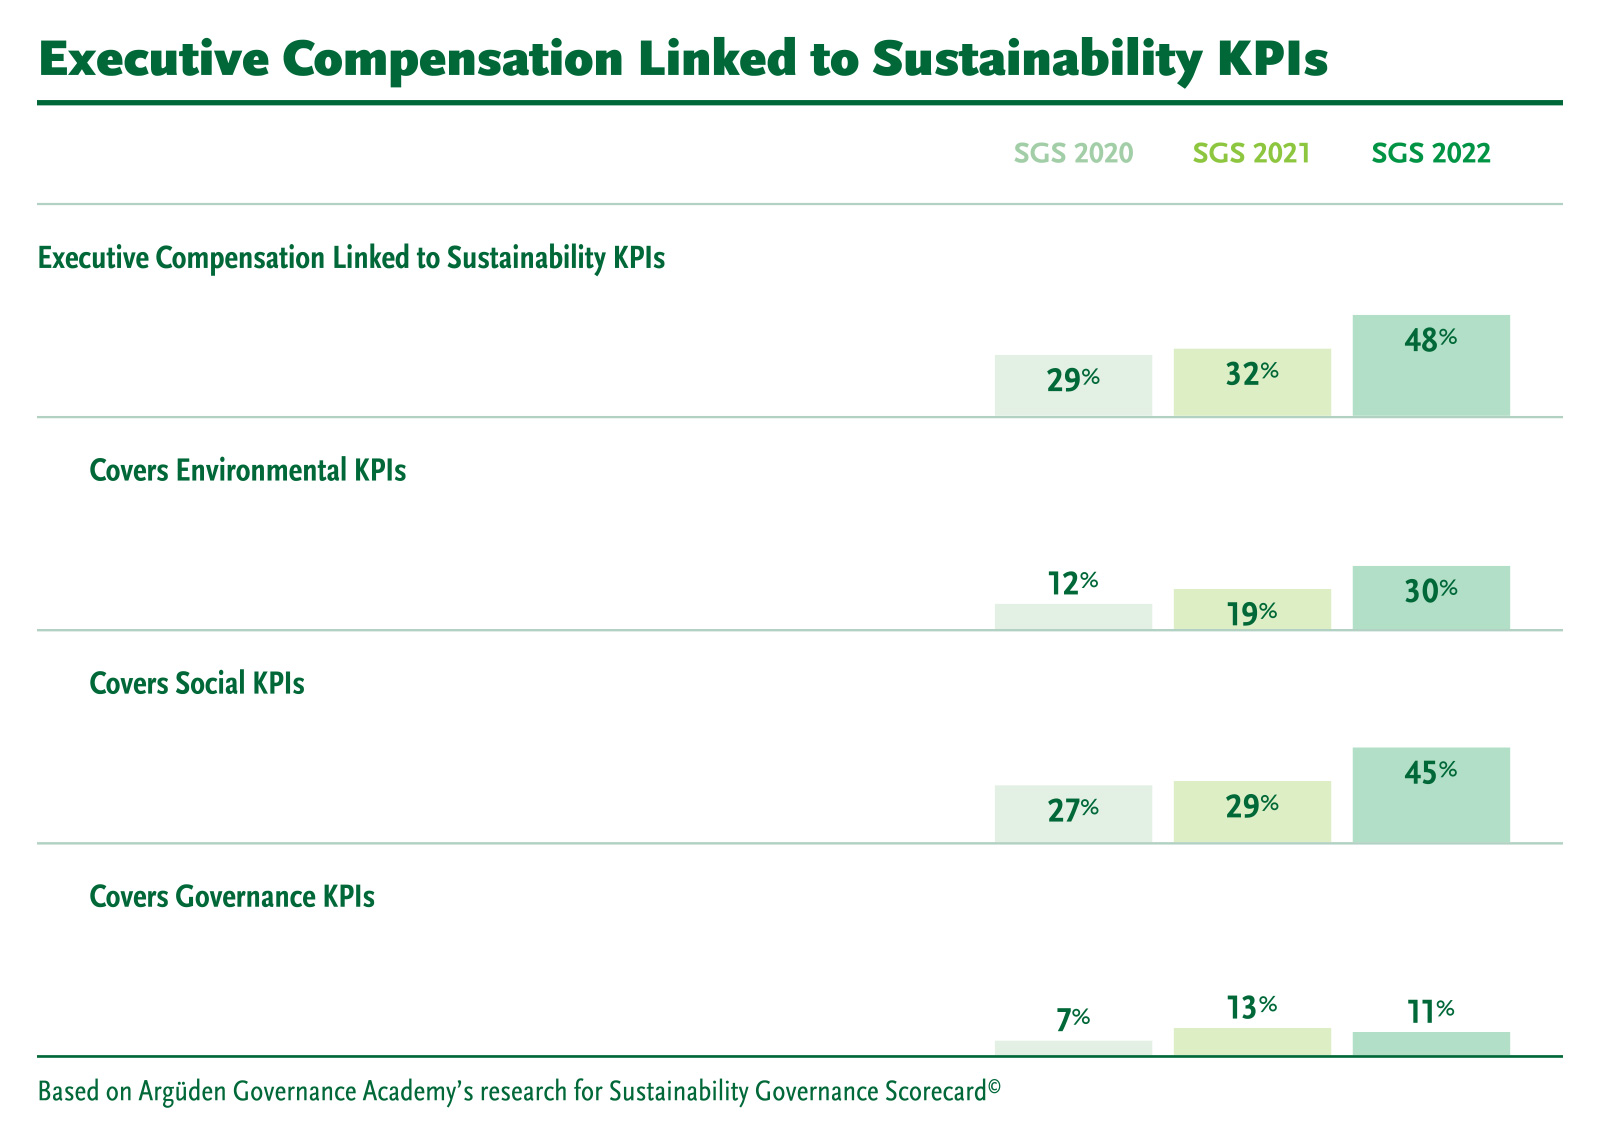 SGS 2022 Executive Compensation Linked to Sustainability KPIs